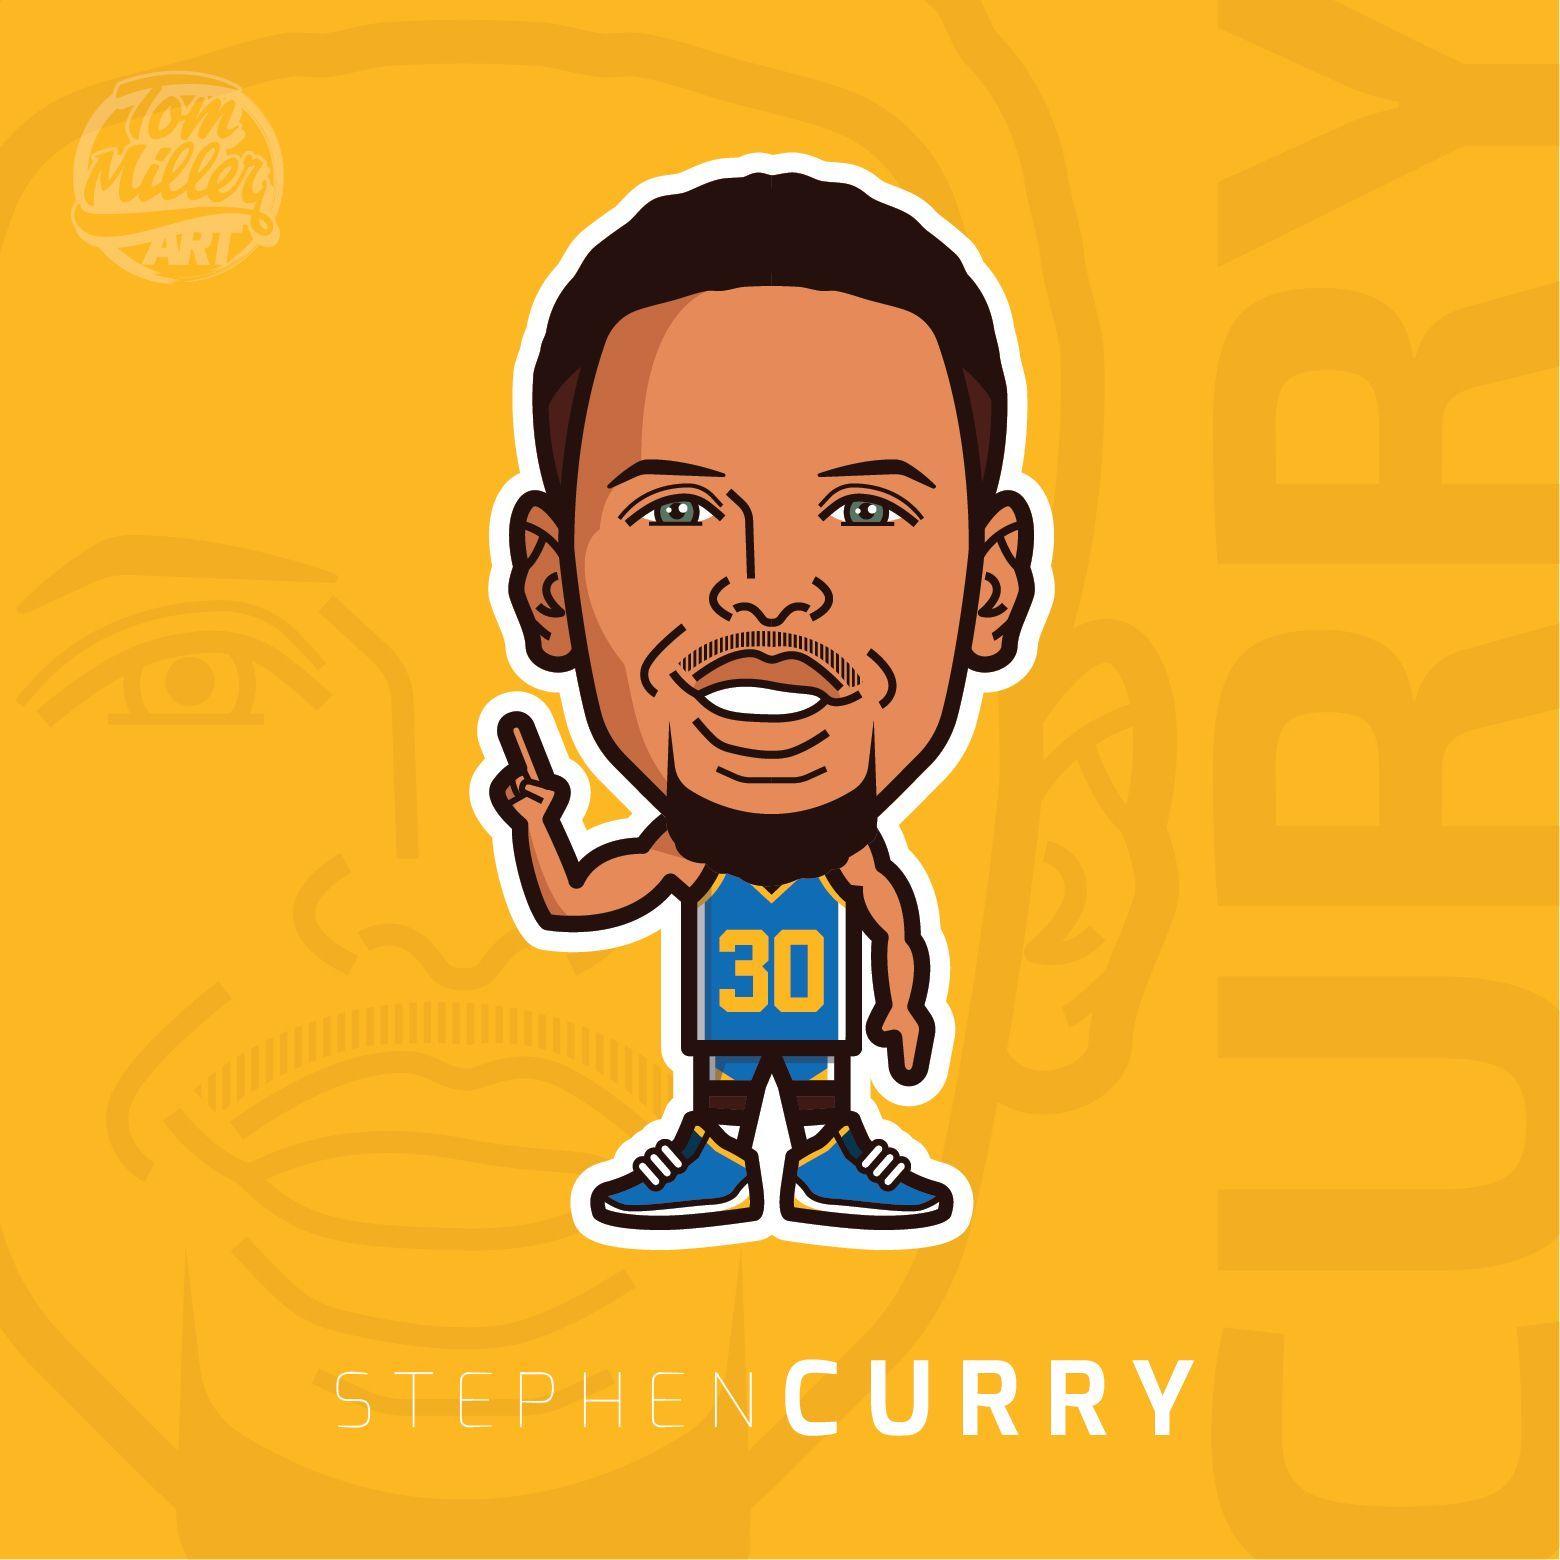 Stephen Curry Live Wallpapers  Nba wallpapers Stephen curry Nba pictures